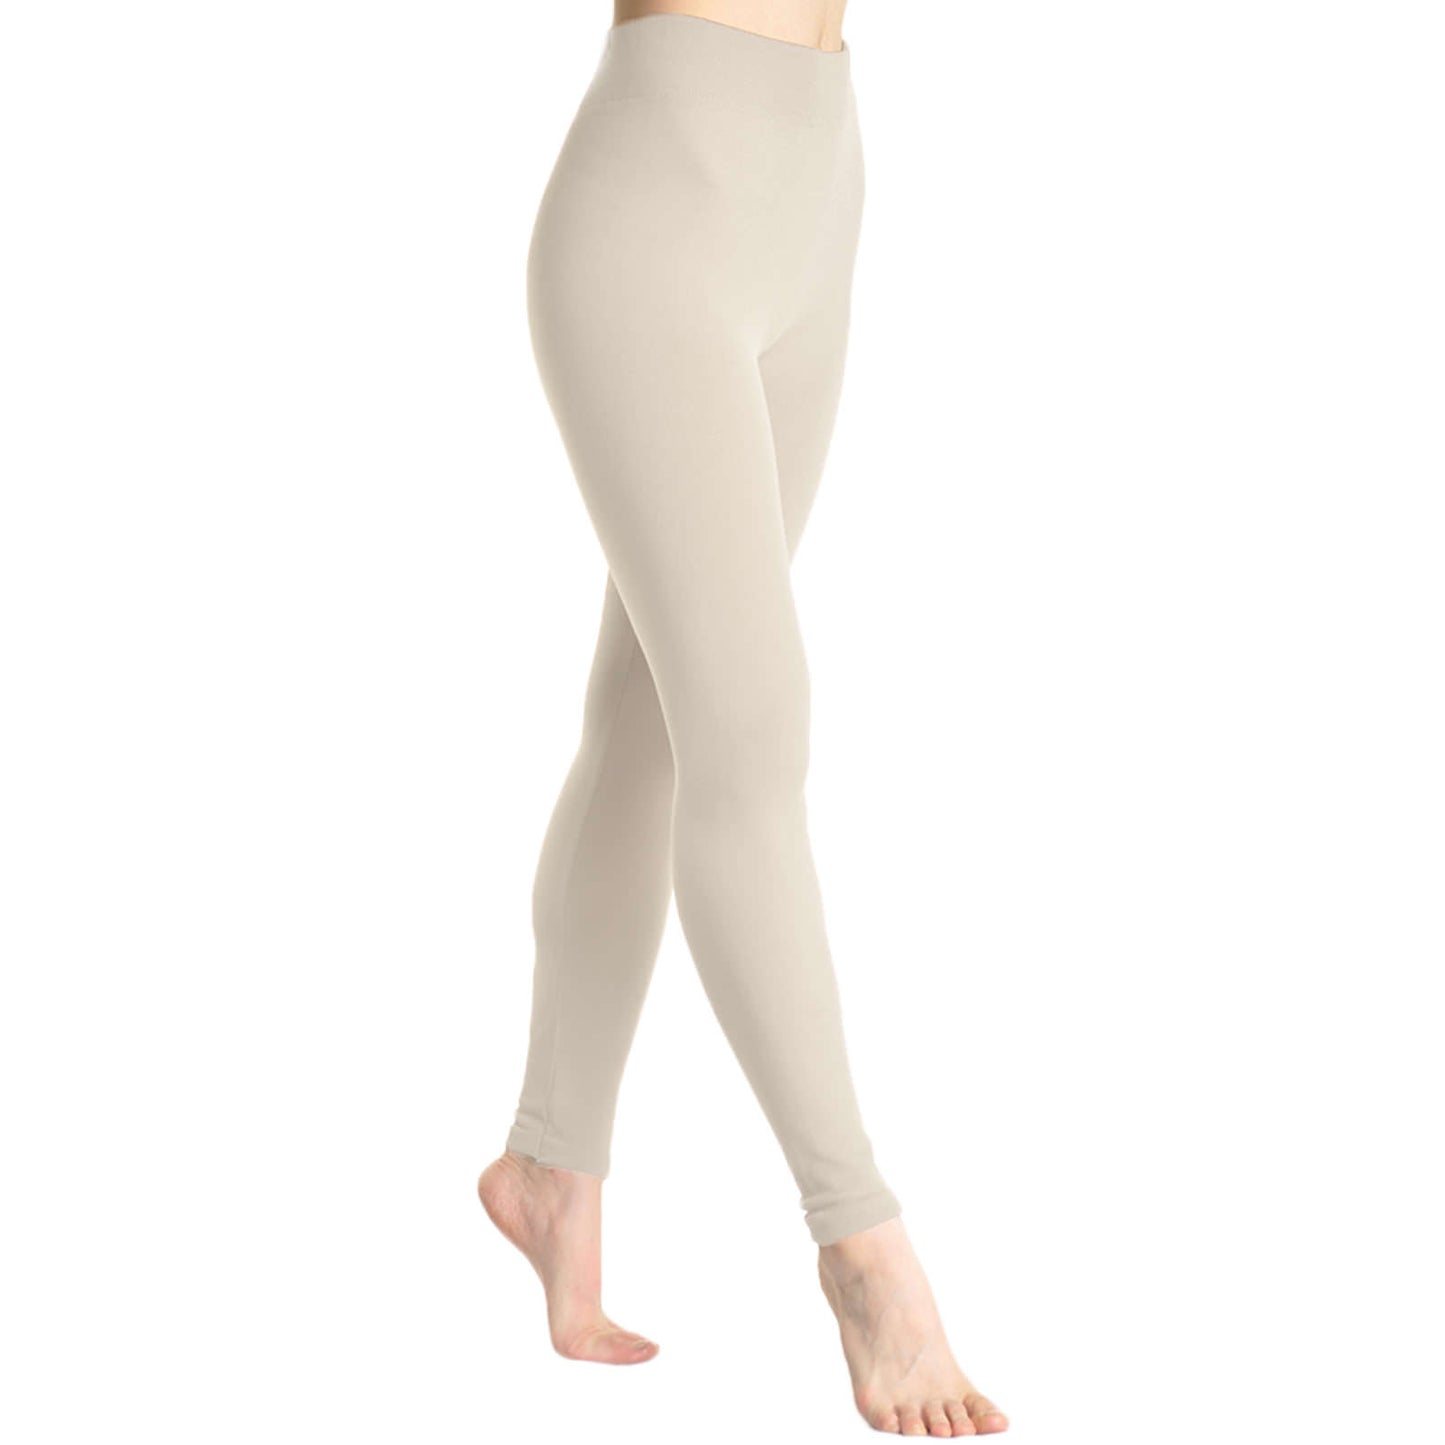 Angelina Seamless Footless Leggings with Winter Warmth Plus Lining (6 or 12 Pack), #022